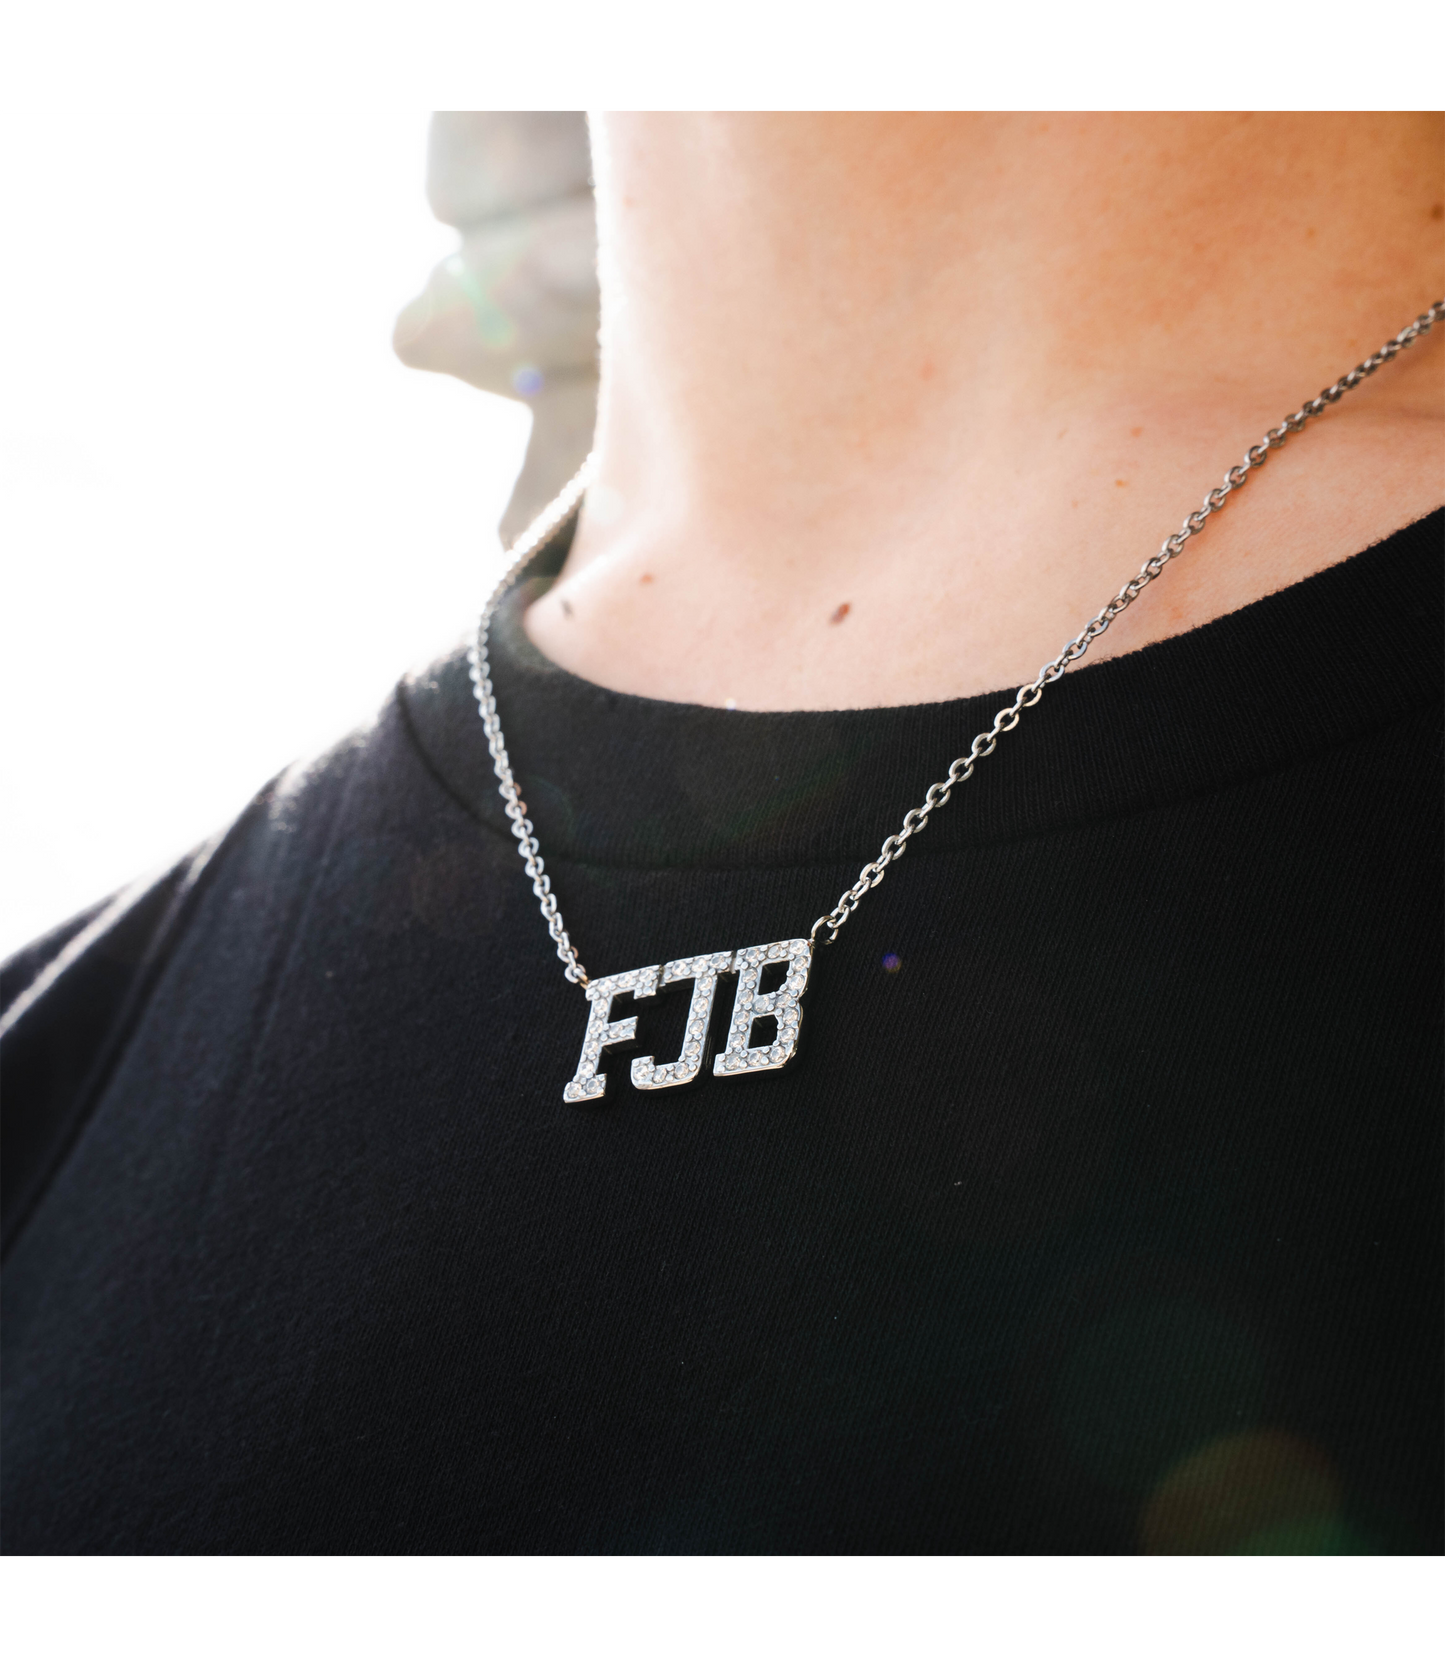 FJB Premium Stainless Steel Necklace